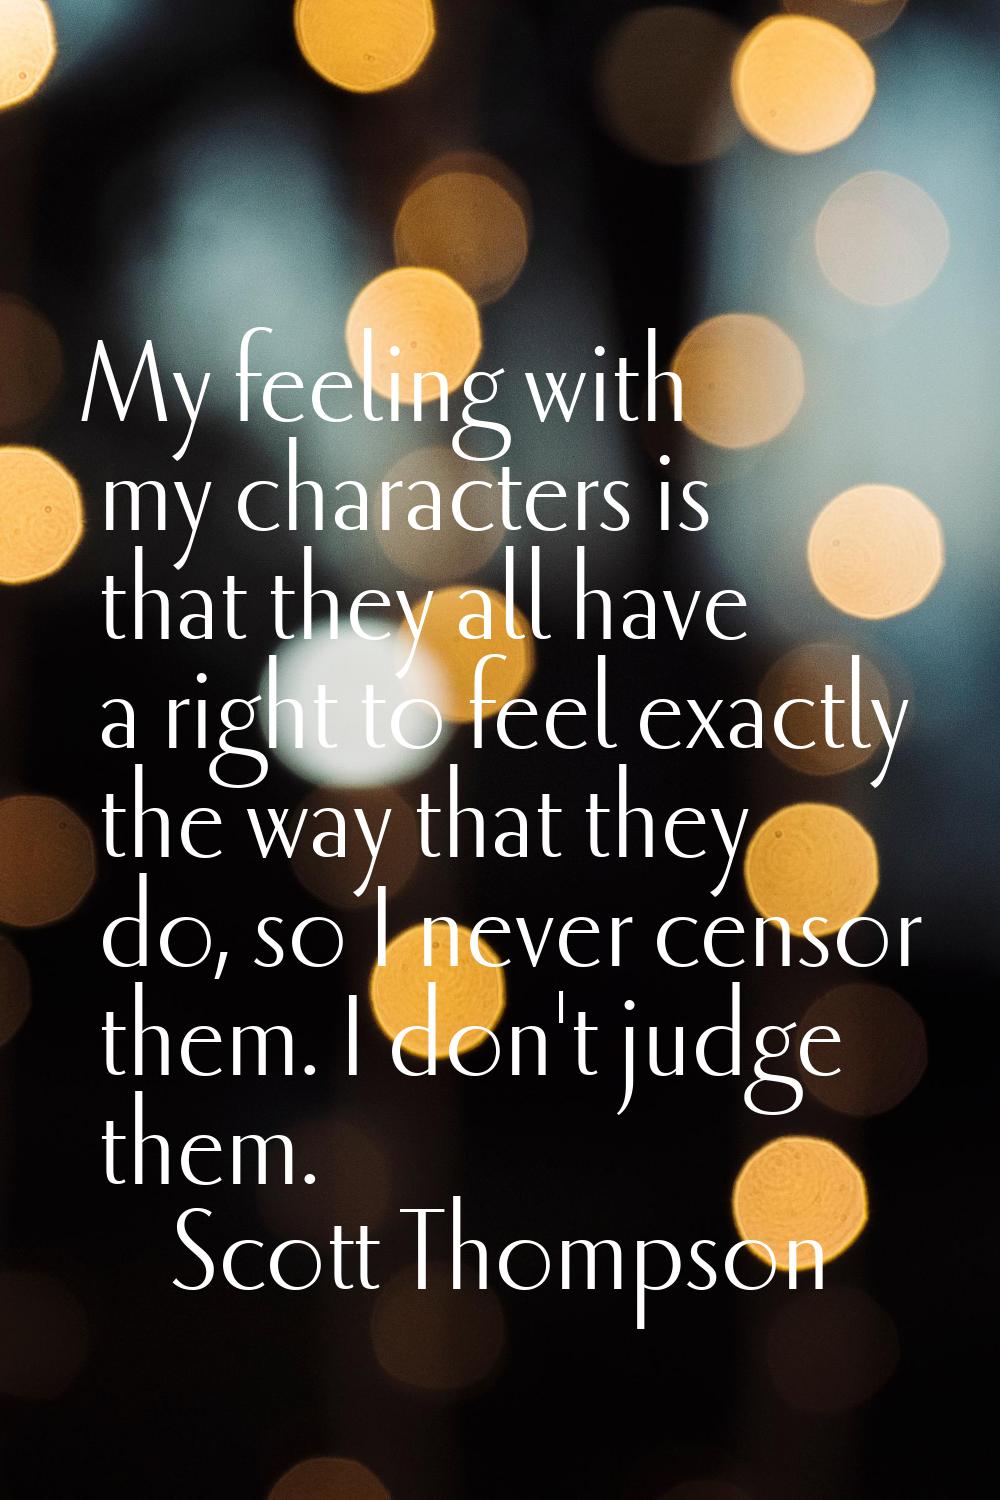 My feeling with my characters is that they all have a right to feel exactly the way that they do, s